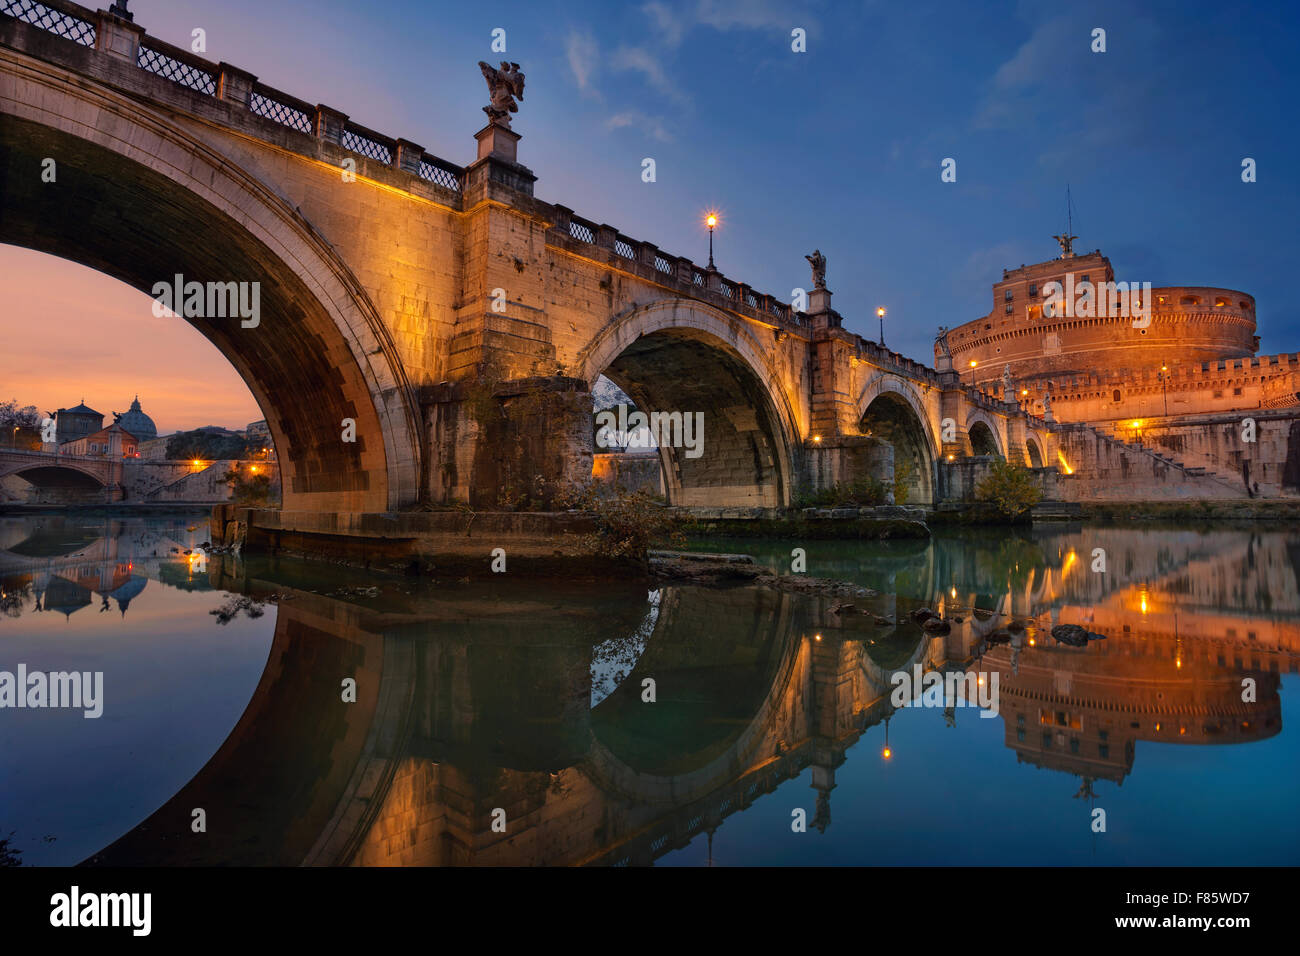 Rome. Image of the Castle of Holy Angel and Holy Angel Bridge over the Tiber River in Rome at sunset. Stock Photo